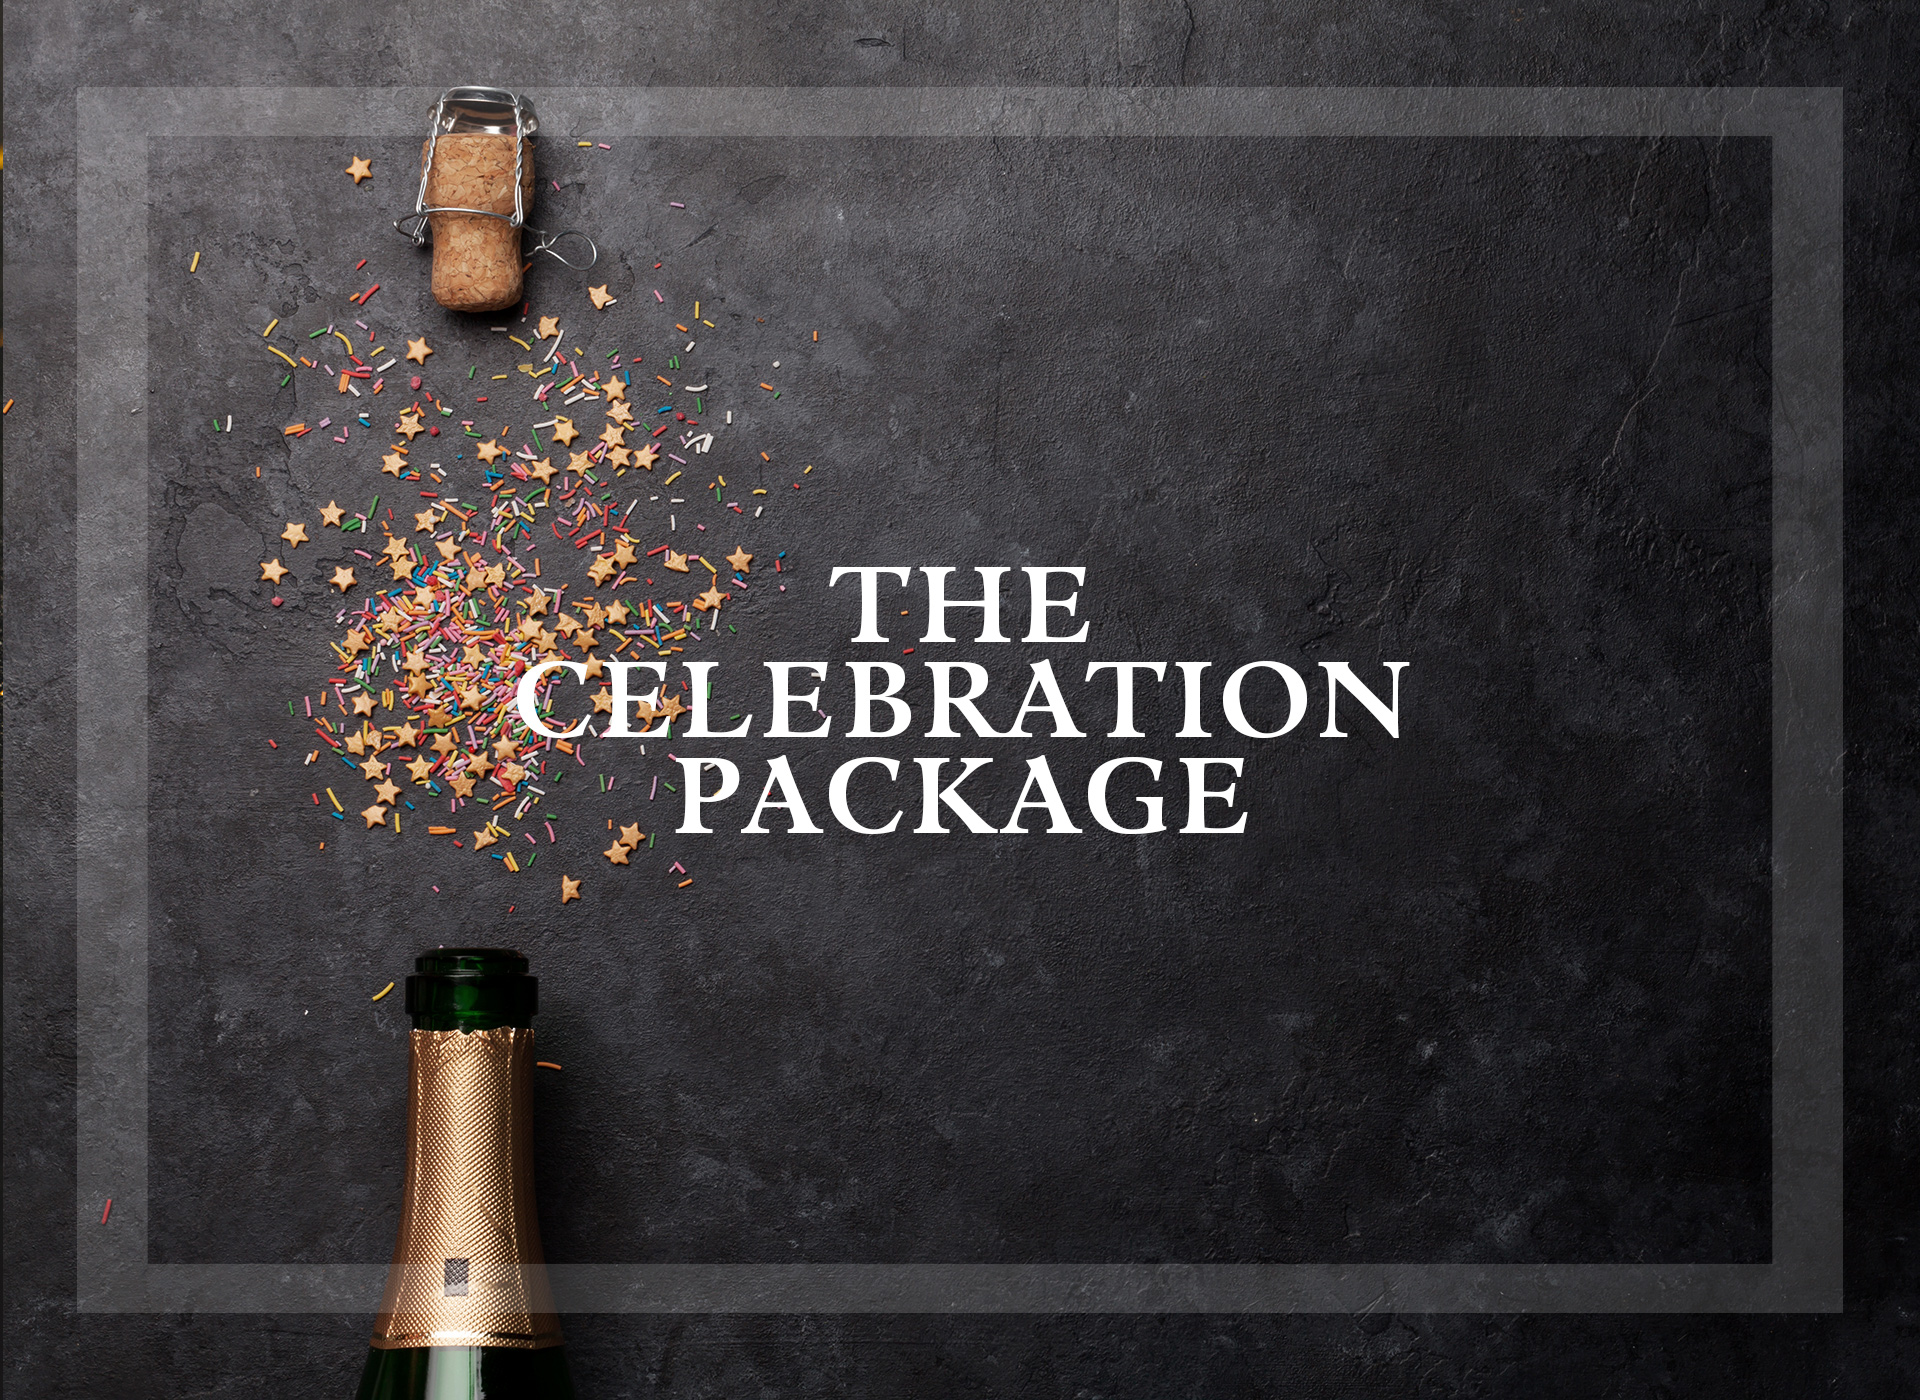 The Celebration Package